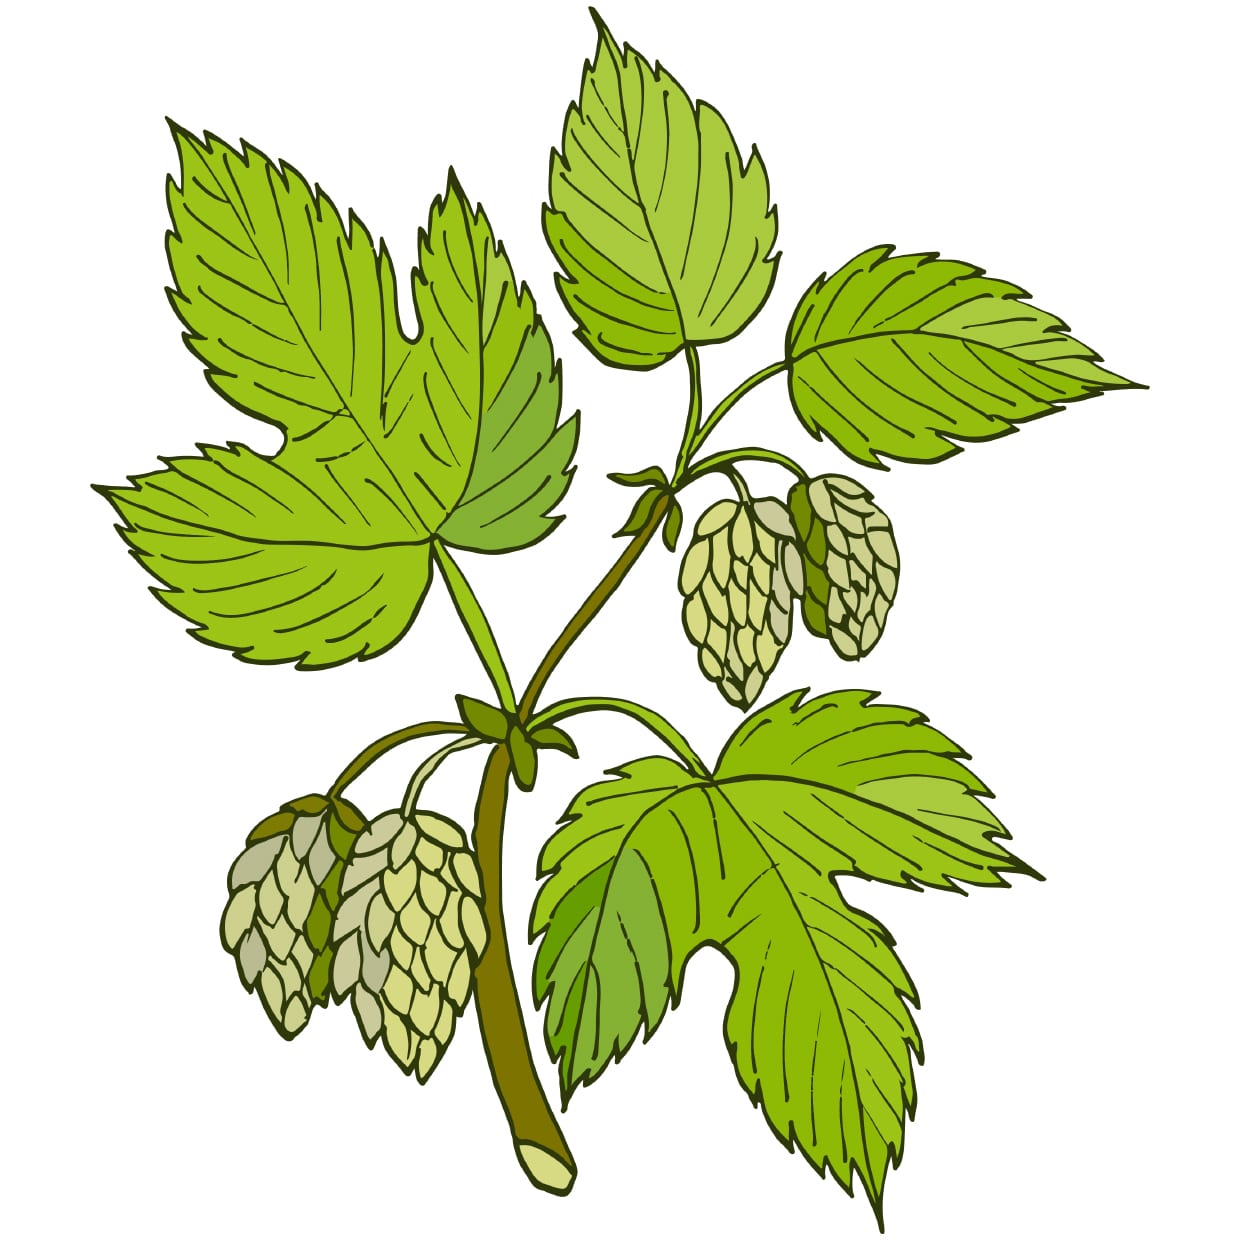 An illustration of a hops plant.